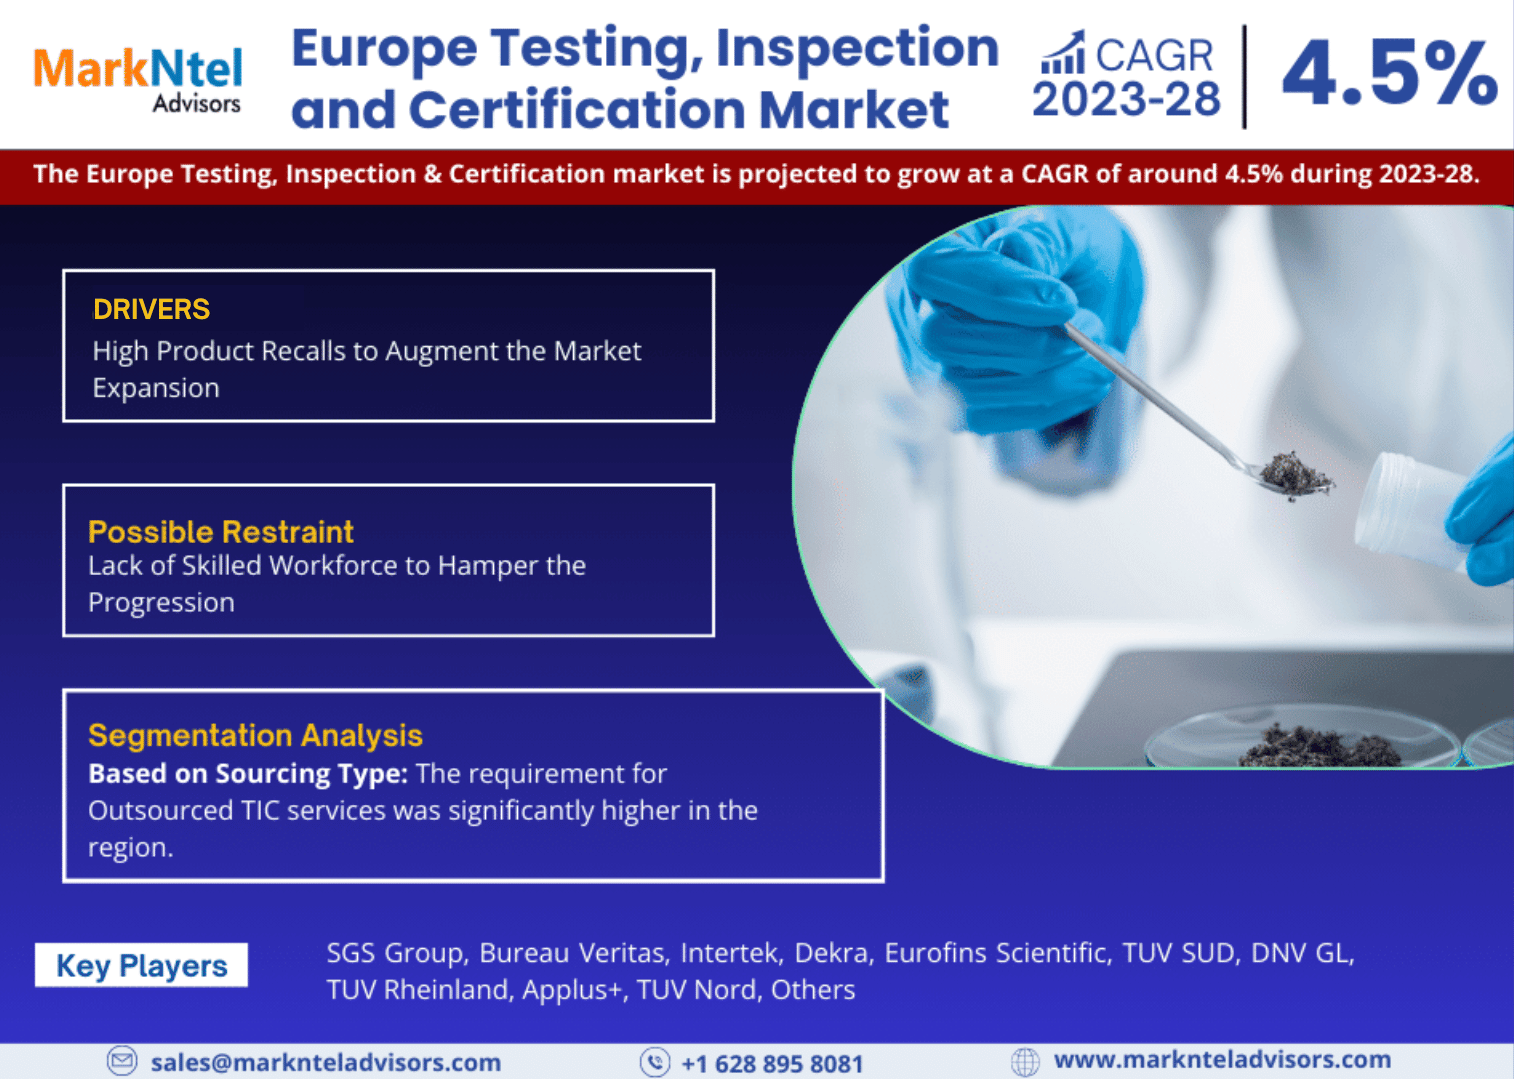 Europe Testing, Inspection and Certification Market